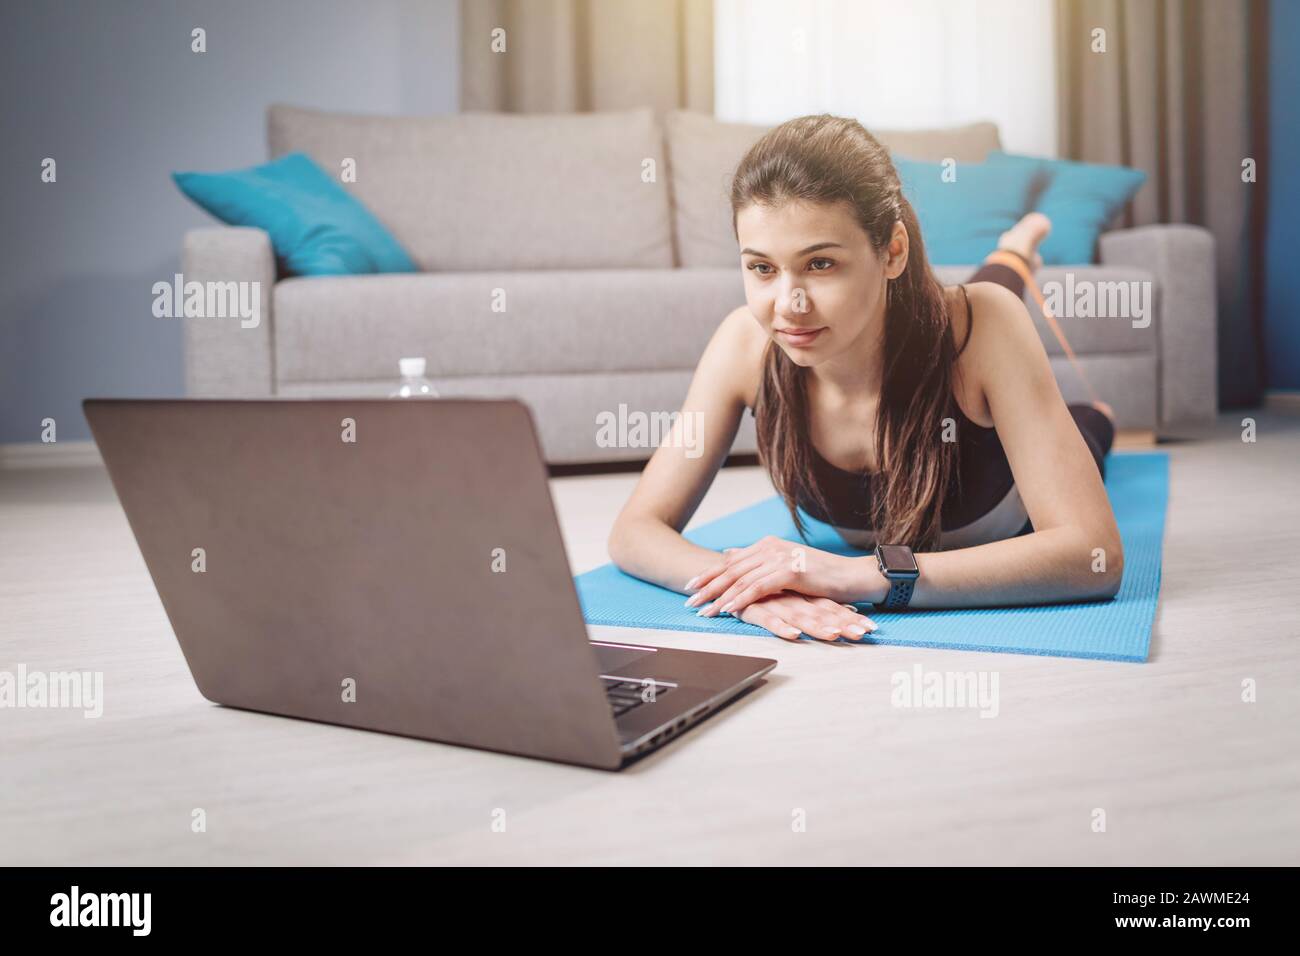 Brunette Making Physical Exercises According to Internet Guide Stock Photo